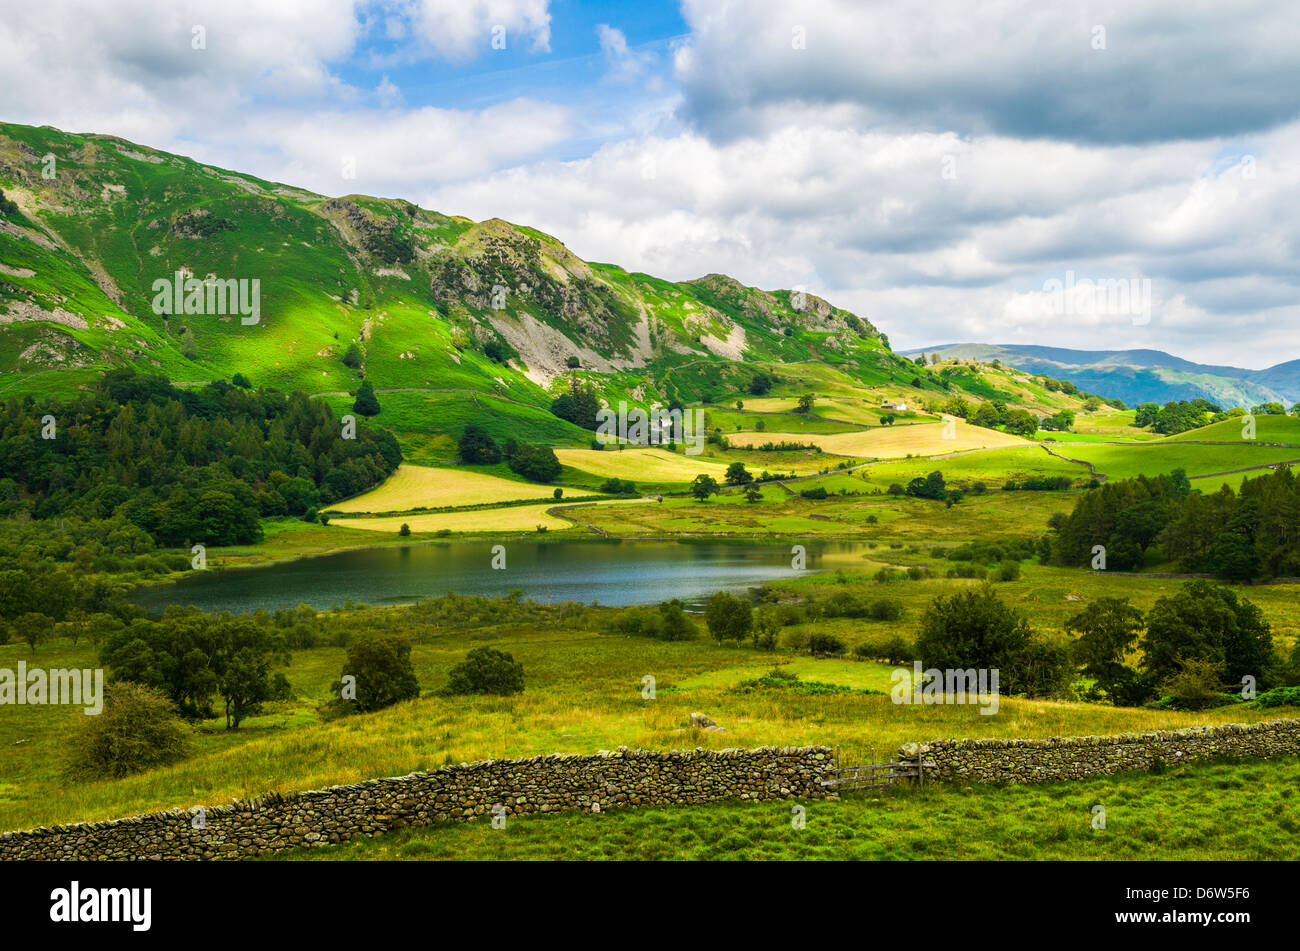 Lingmoor Fell and Little Langdale Tarn in the English Lake District, Cumbria, England. Stock Photo